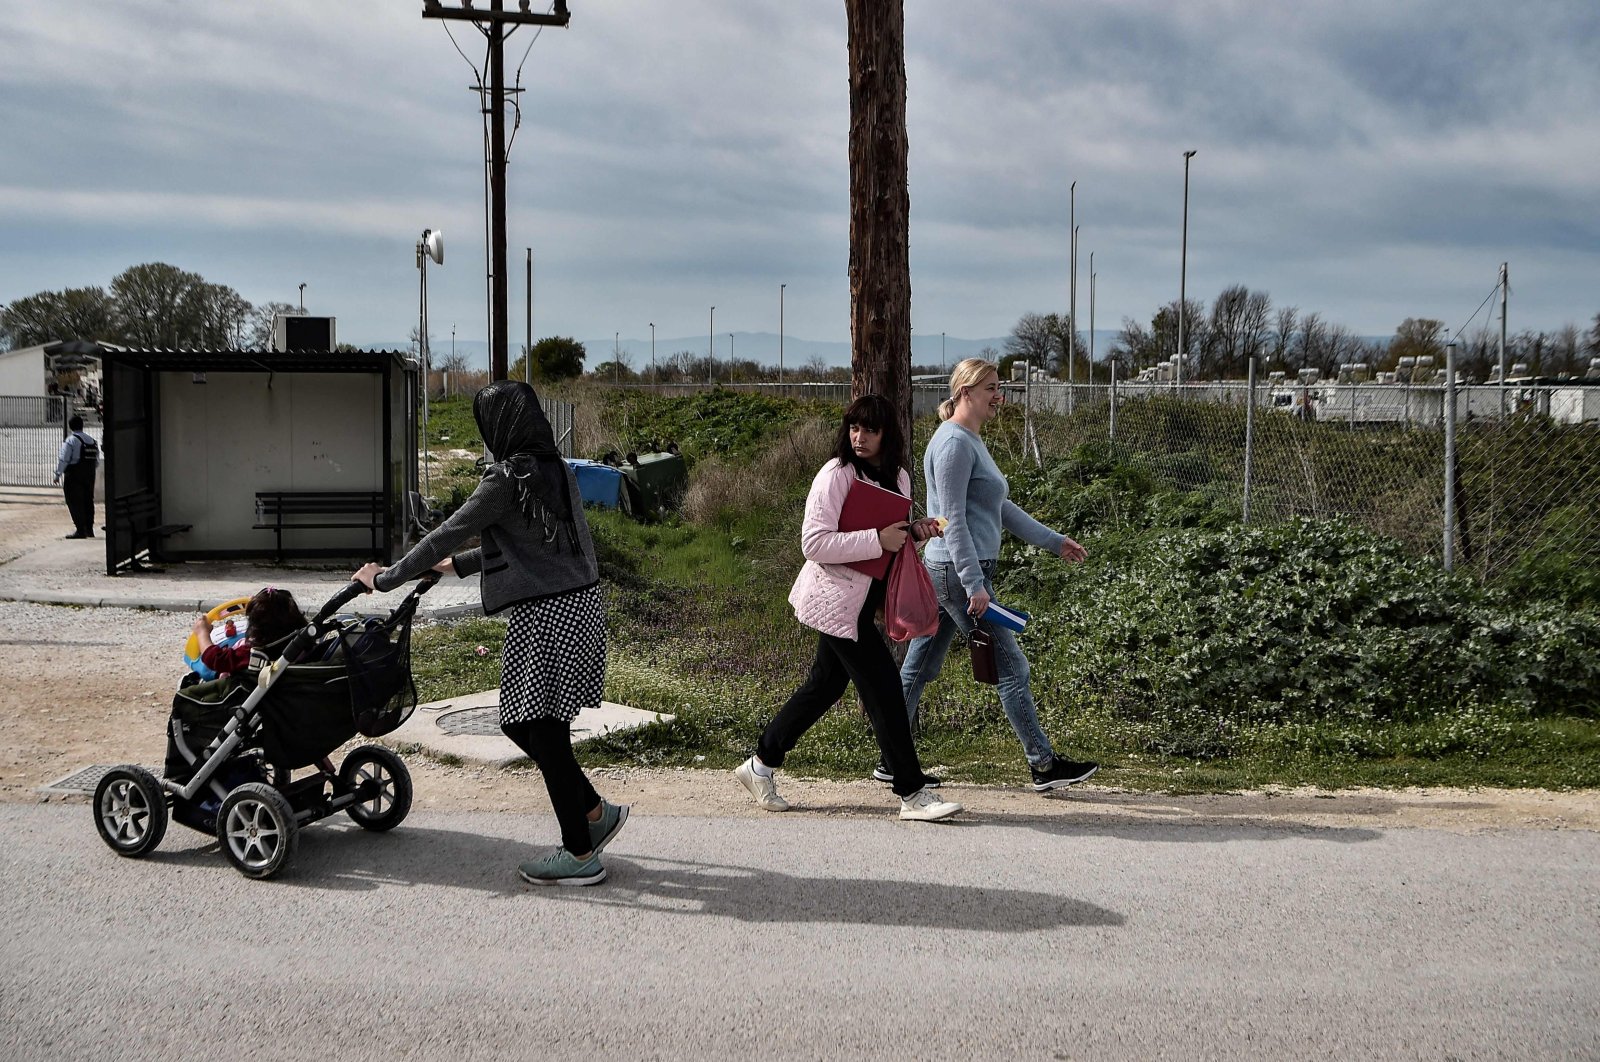 Ukrainian refugees (R) walk next to a migrant woman from Afghanistan with her baby (L) at Serres refugee camp, northern Greece, April 4, 2022. (AFP Photo)